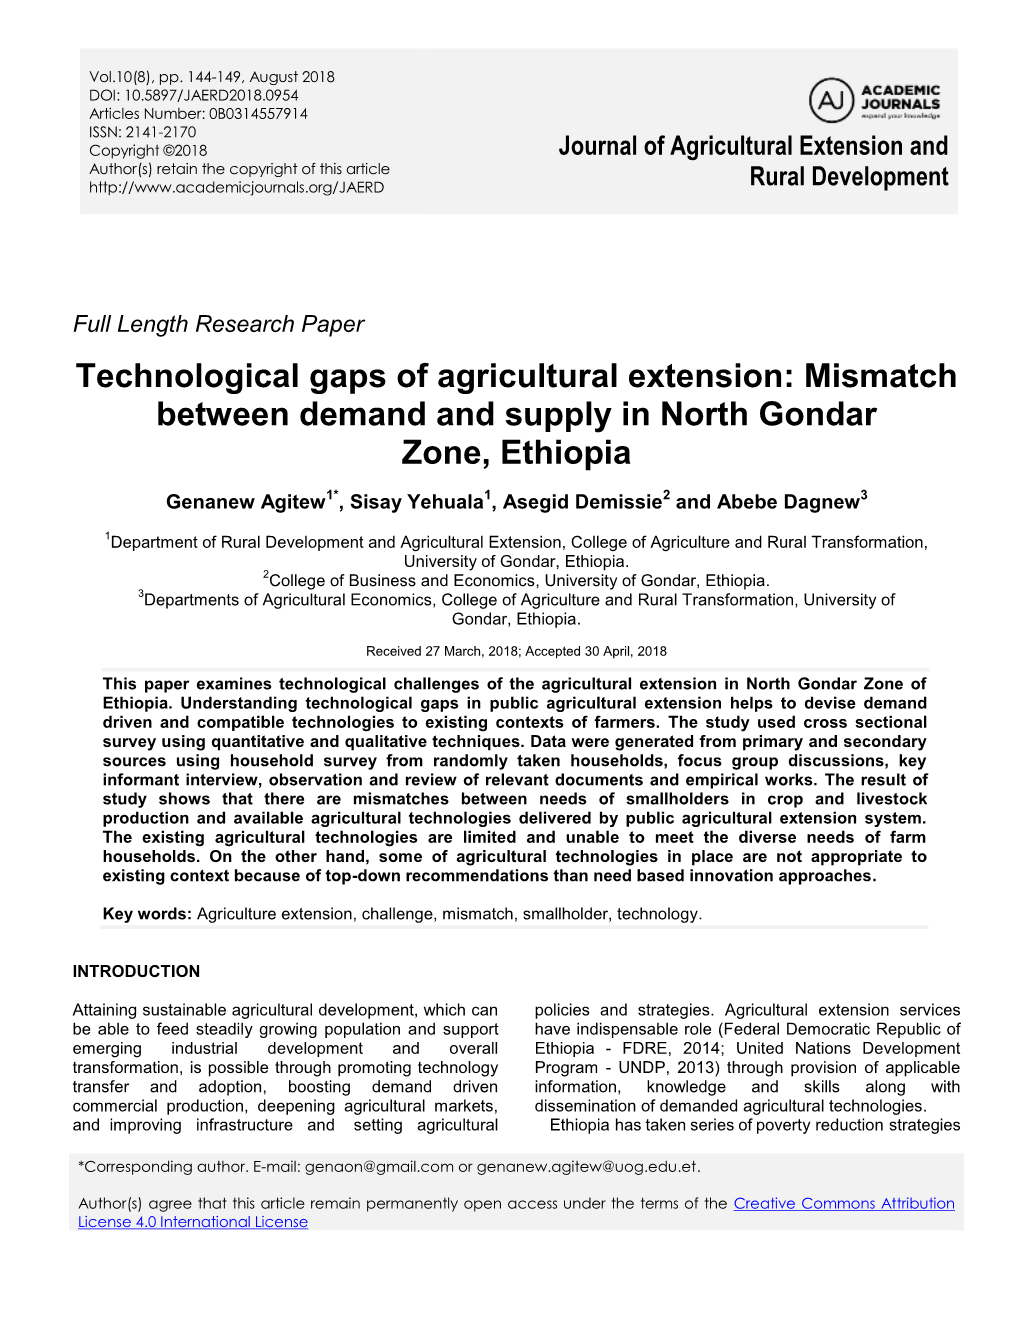 Technological Gaps of Agricultural Extension: Mismatch Between Demand and Supply in North Gondar Zone, Ethiopia